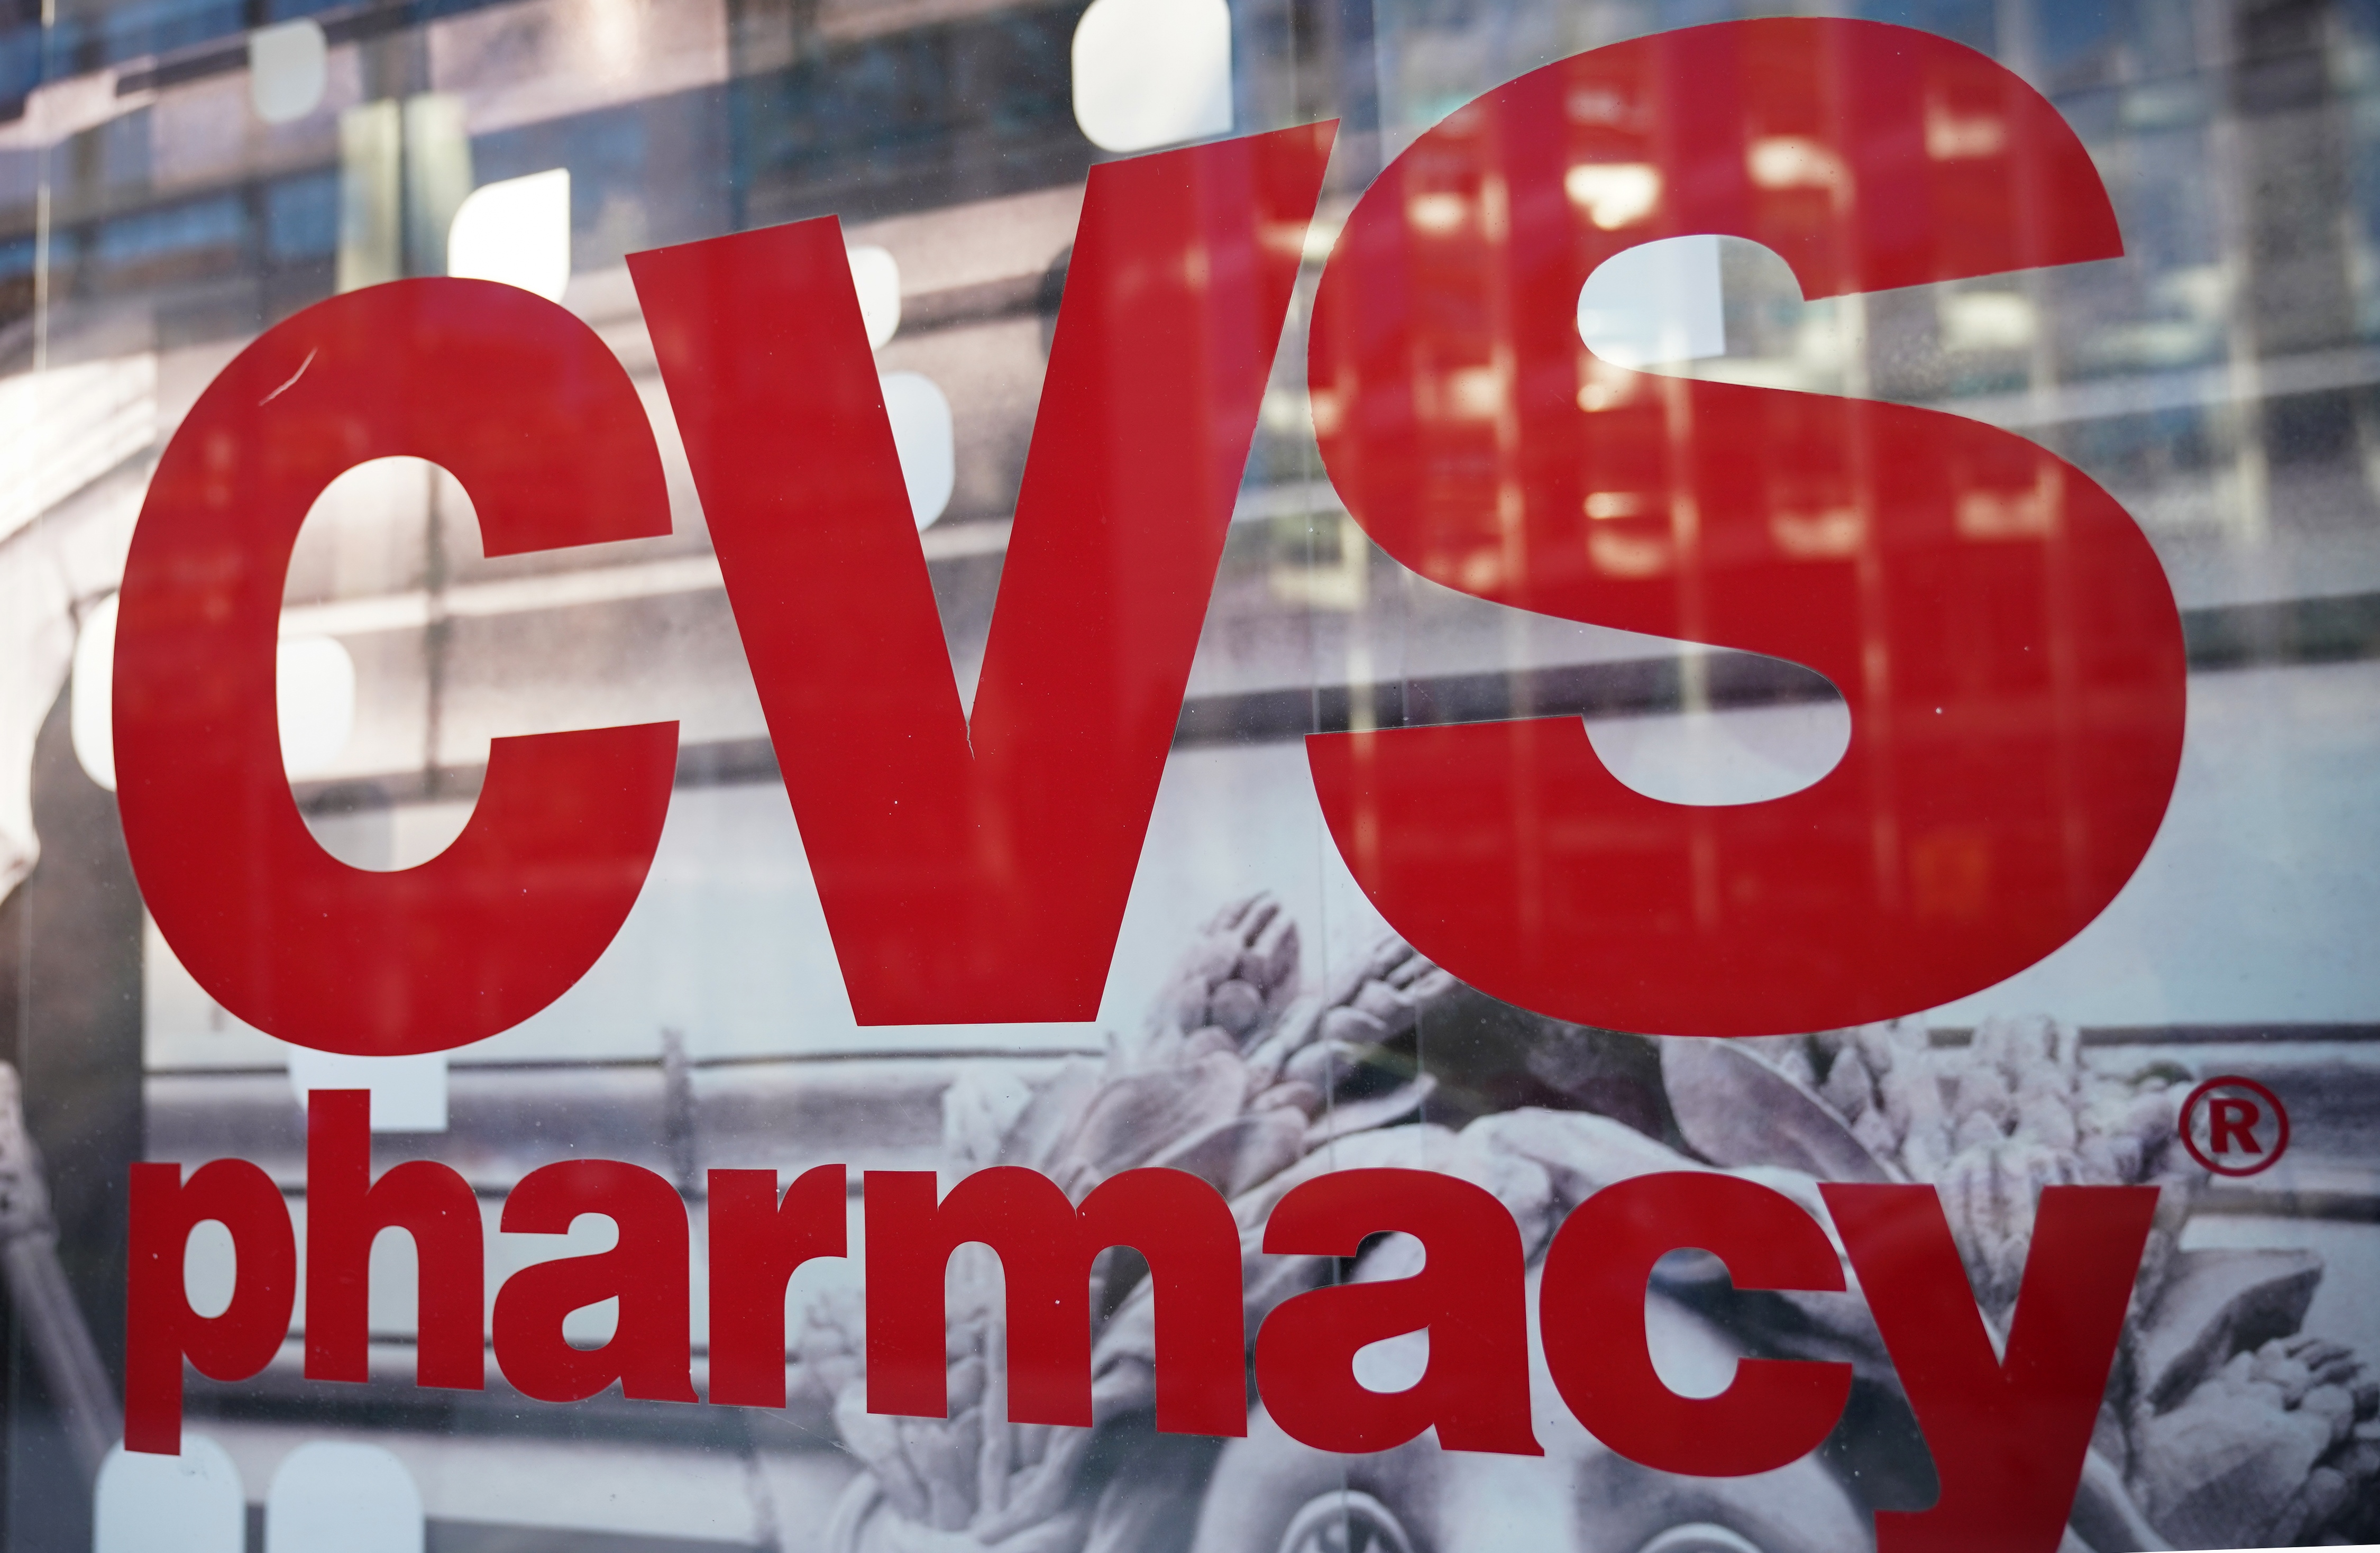 The CVS logo on a store in Washington, D.C.